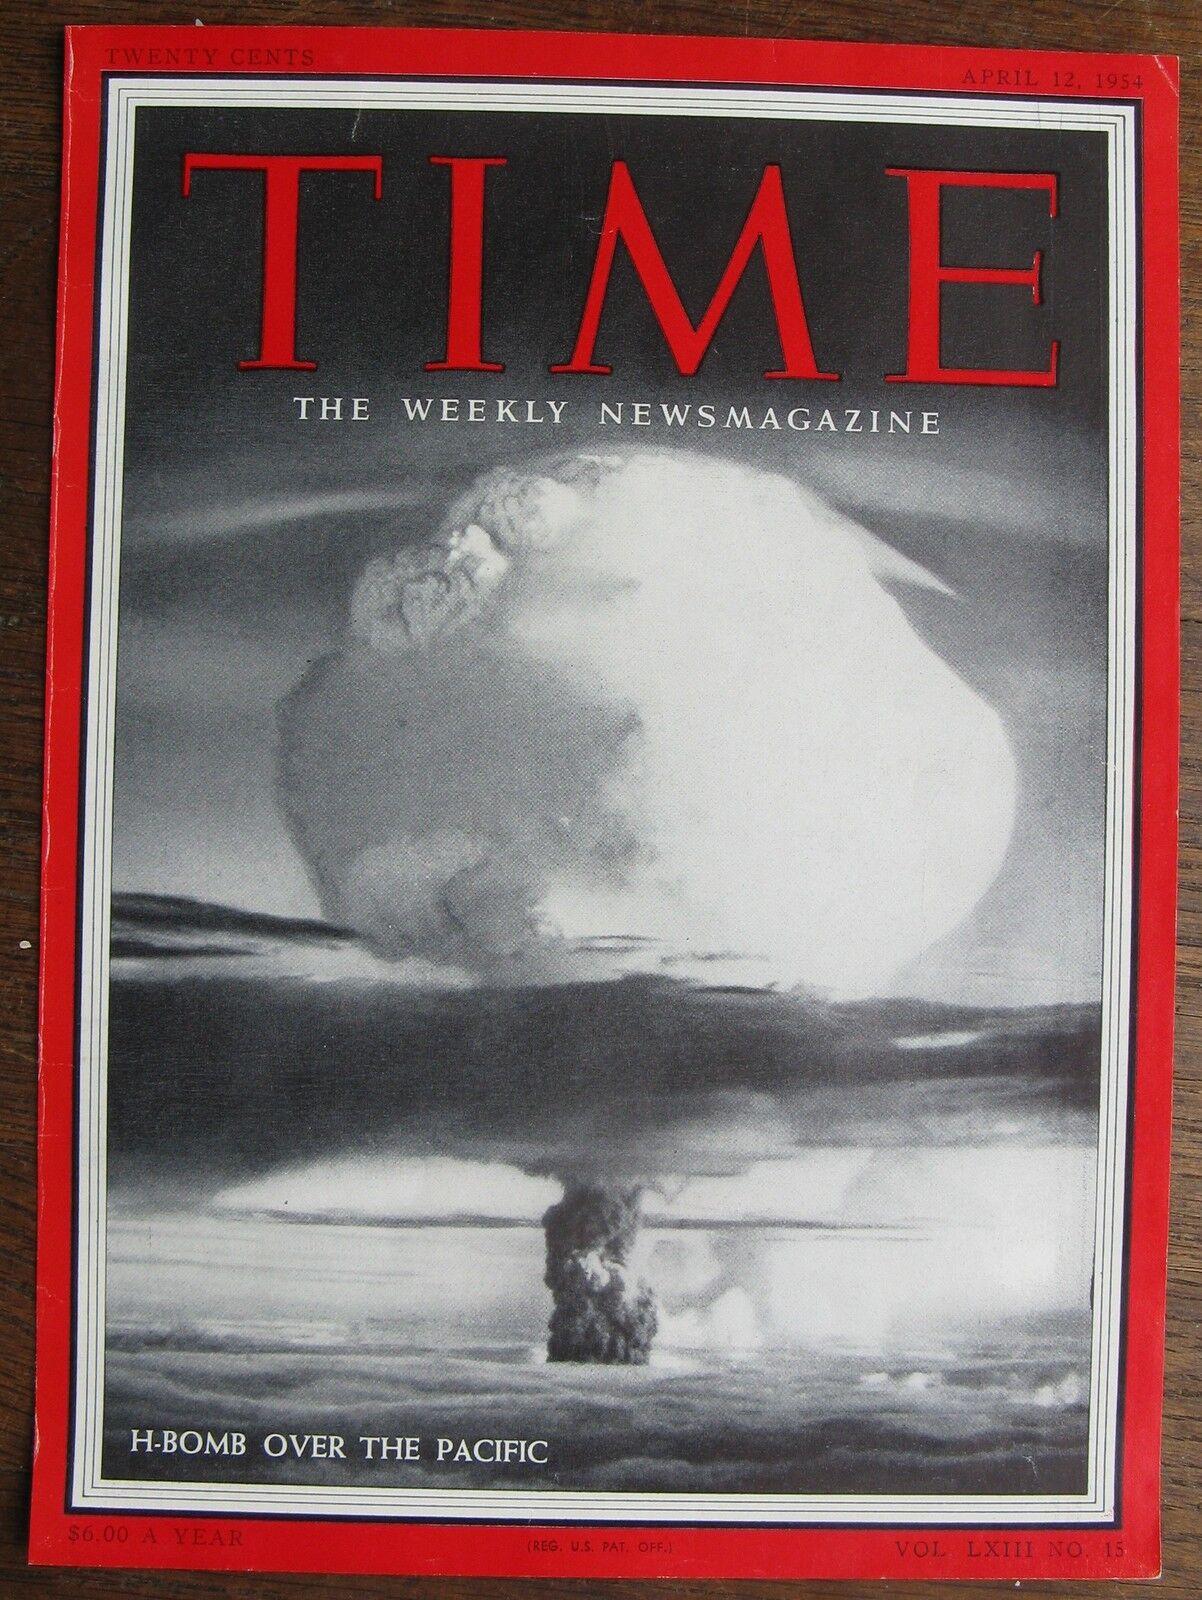 Cover Only - April 12, 1954 Time Magazine H-BOMB OVER THE PACIFIC - cover only